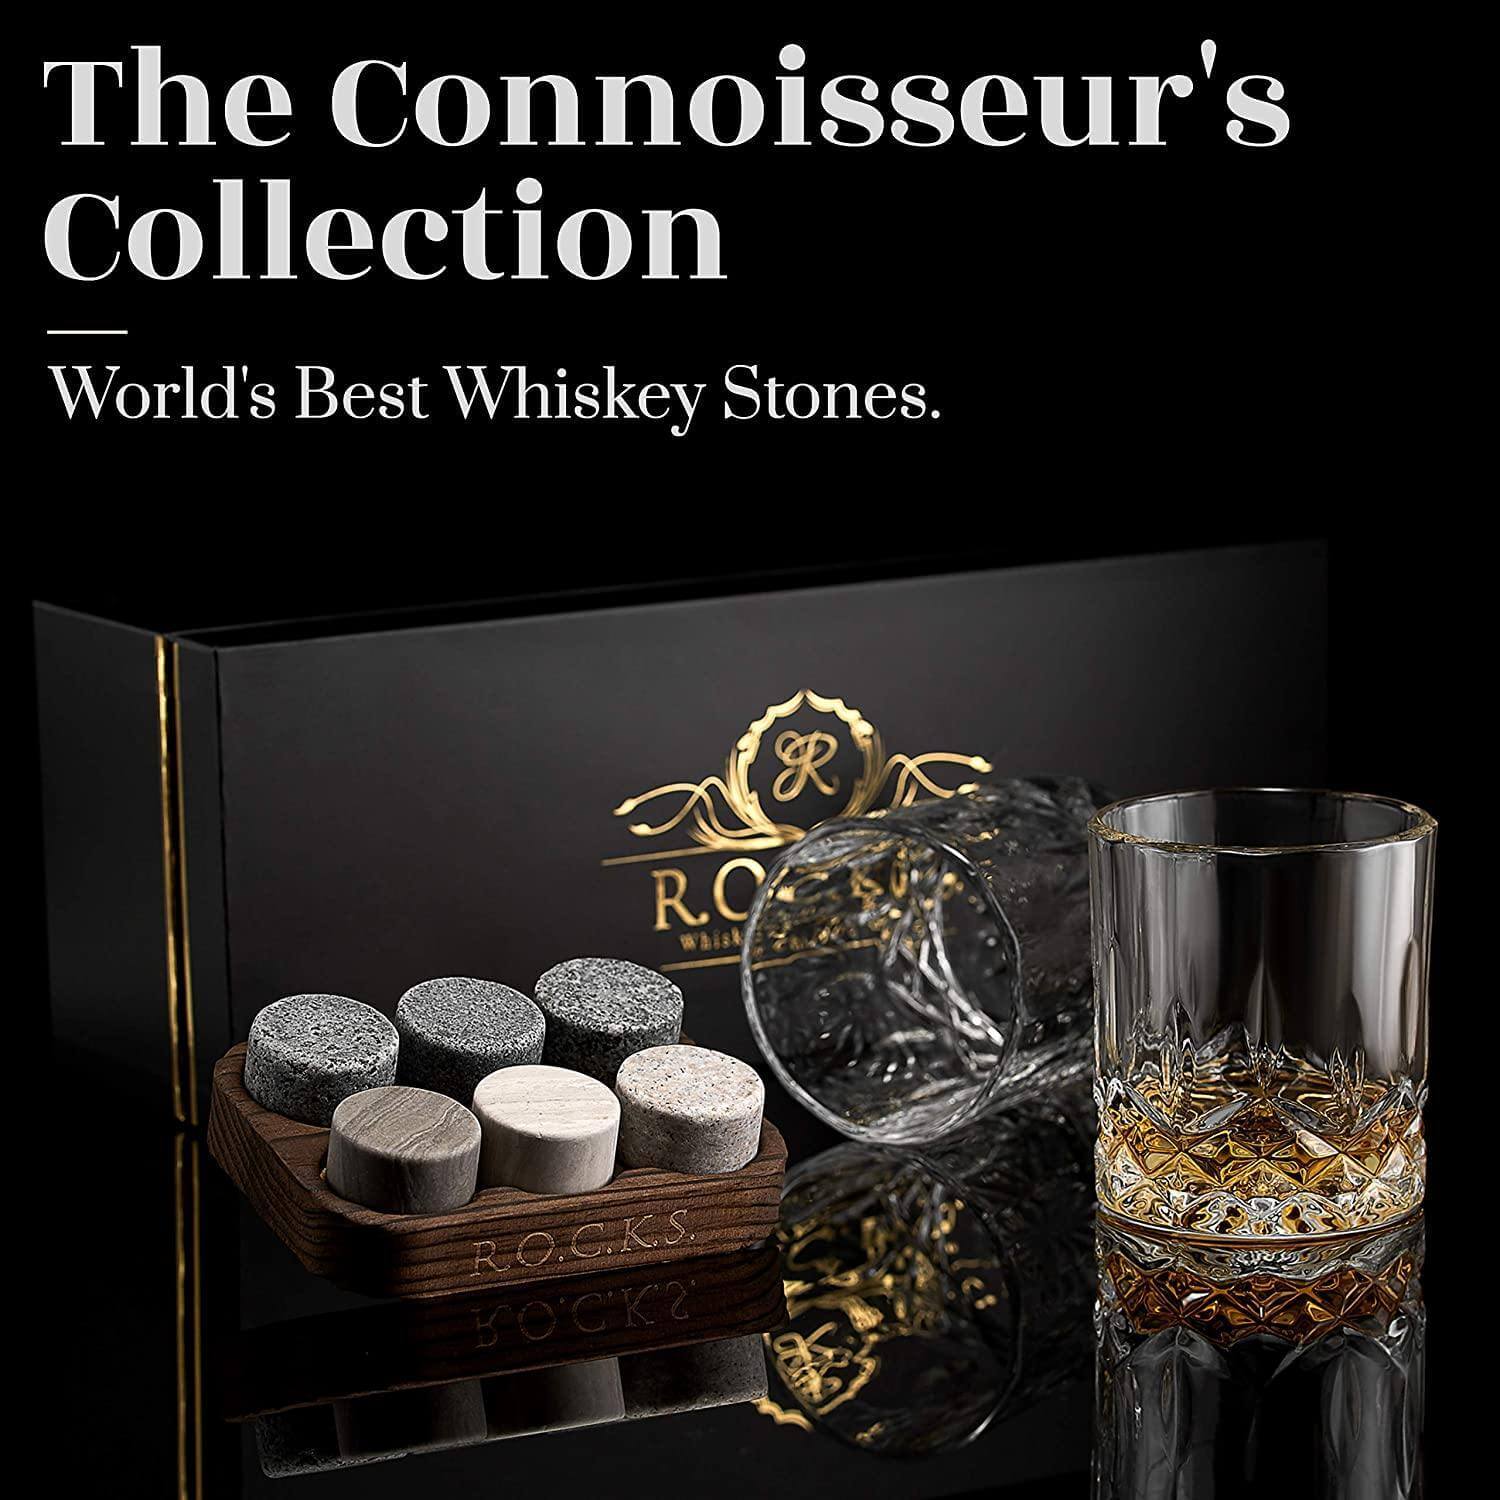 The Connoisseur's Set - Signature Glass Edition by R.O.C.K.S. Whiskey Chilling Stones